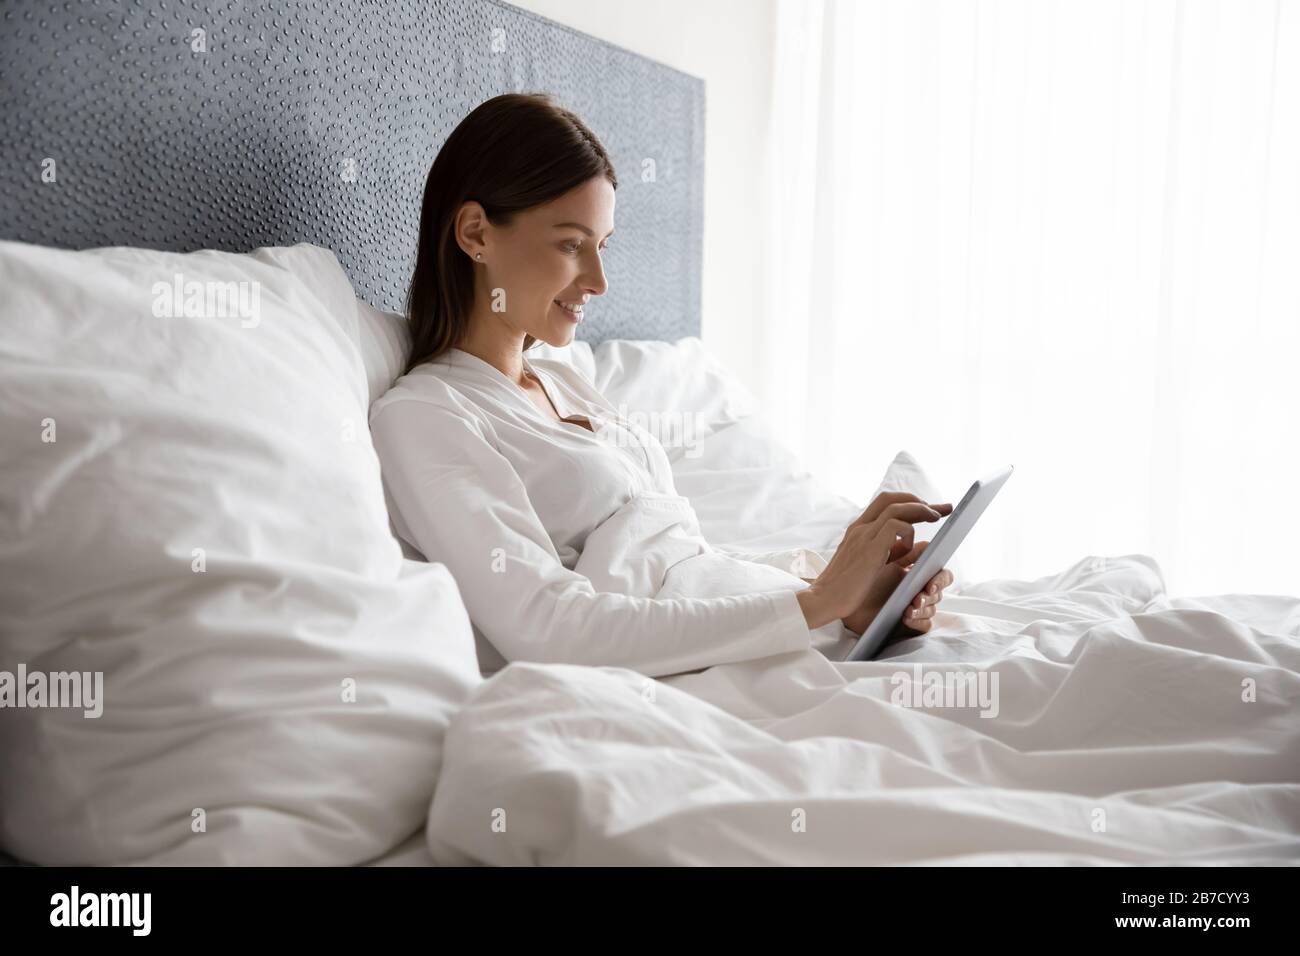 Smiling woman lying in bed under duvet, using digital tablet. Stock Photo